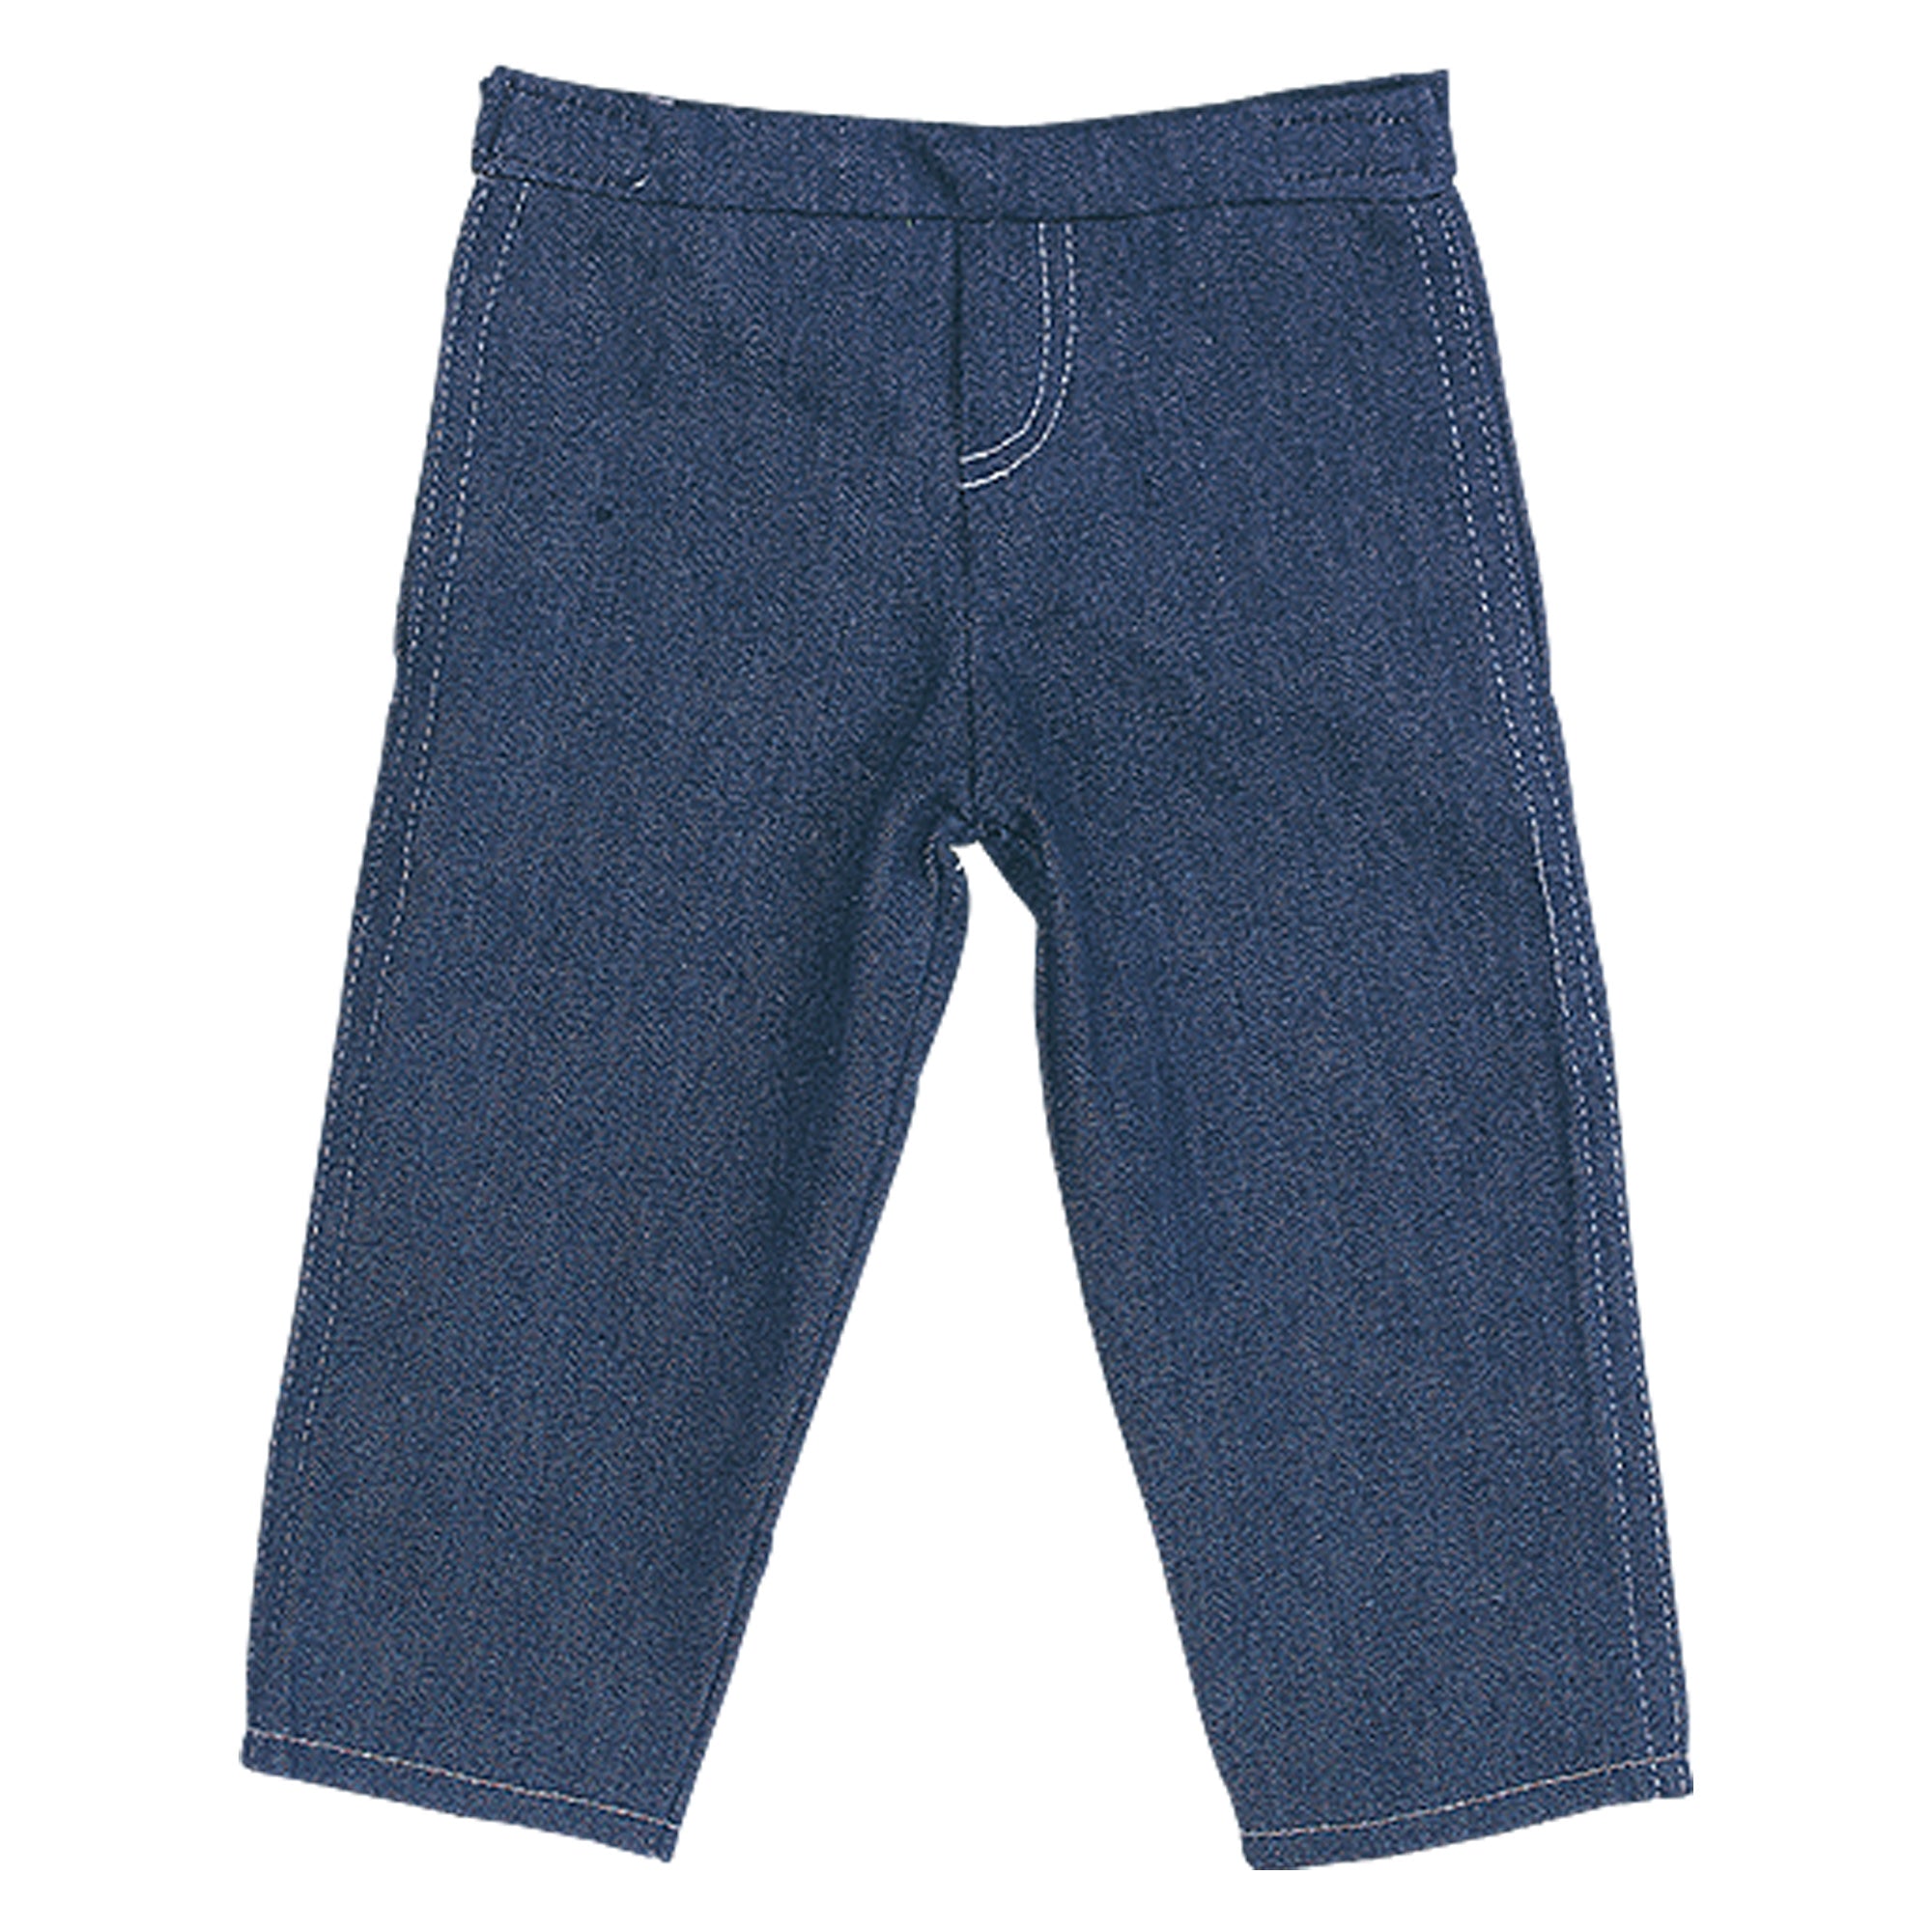 Sophia’s Basic Solid Colored Mix & Match Gender-Neutral Denim Blue Jeans with White Stitching for 18” Dolls, Indigo Blue